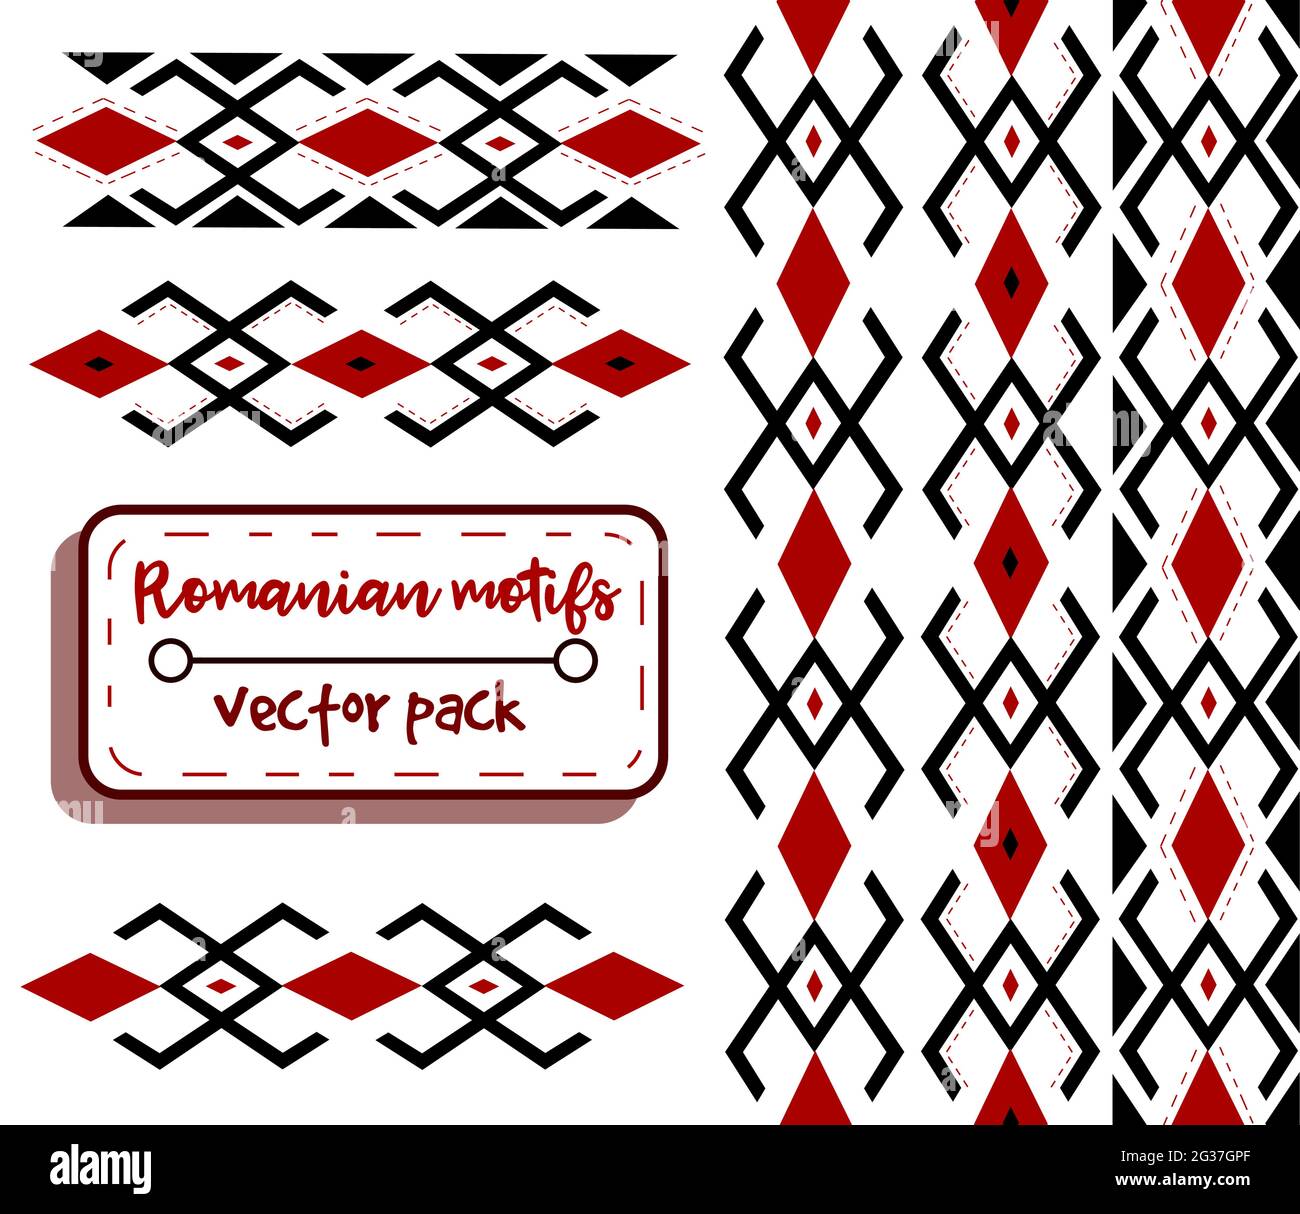 Romanian red and black traditional motifs. Embroidery and needlework conceptual art of moldavian and eastern european fashion. Seamless pattern with e Stock Vector